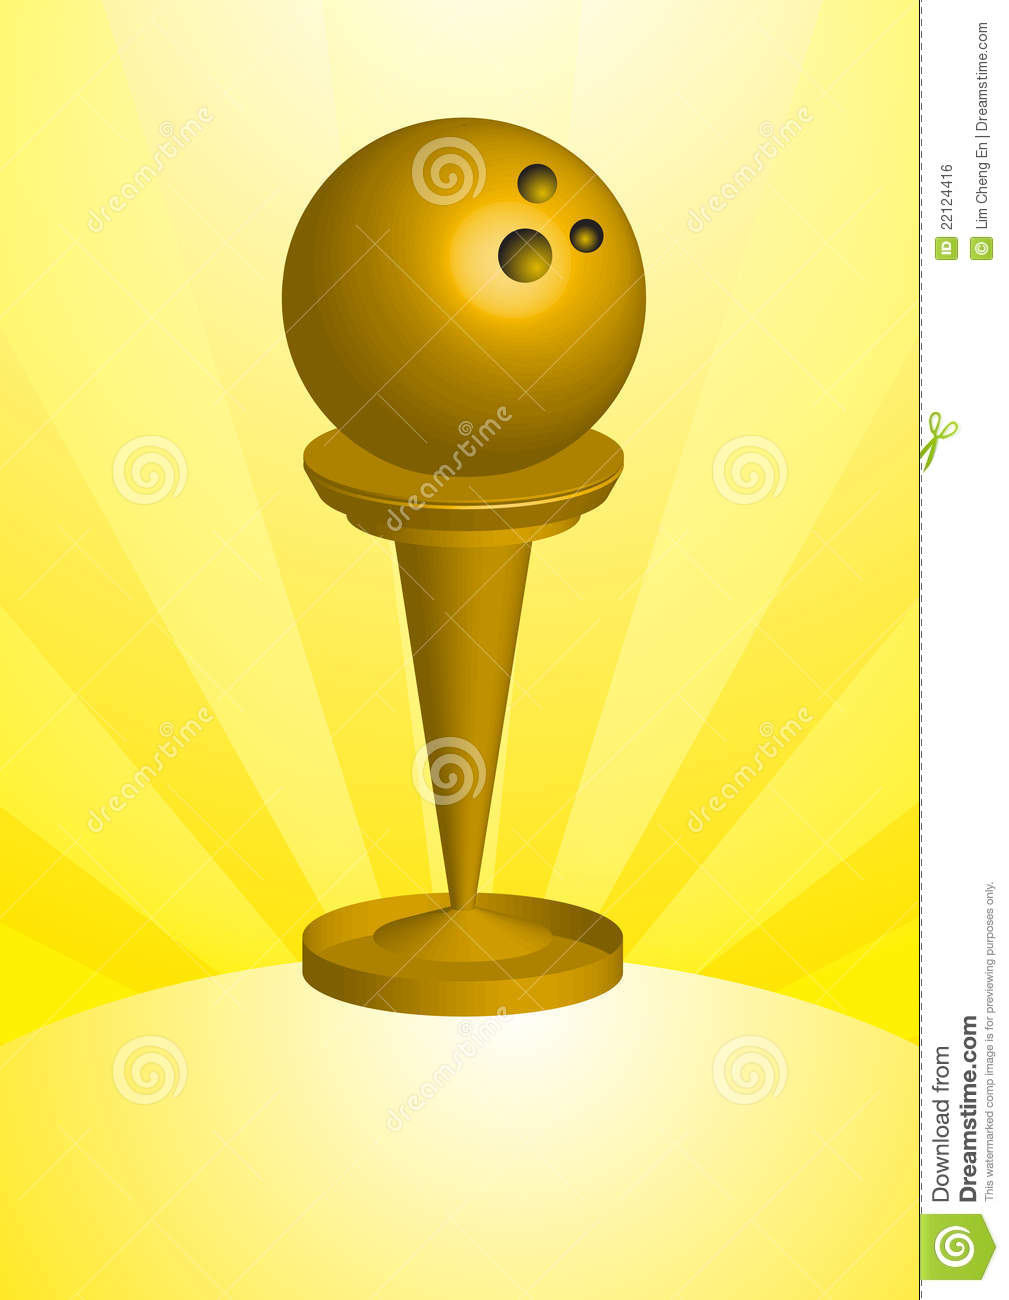 Bowling Ball Trophy Royalty Free Stock Image   Image  22124416